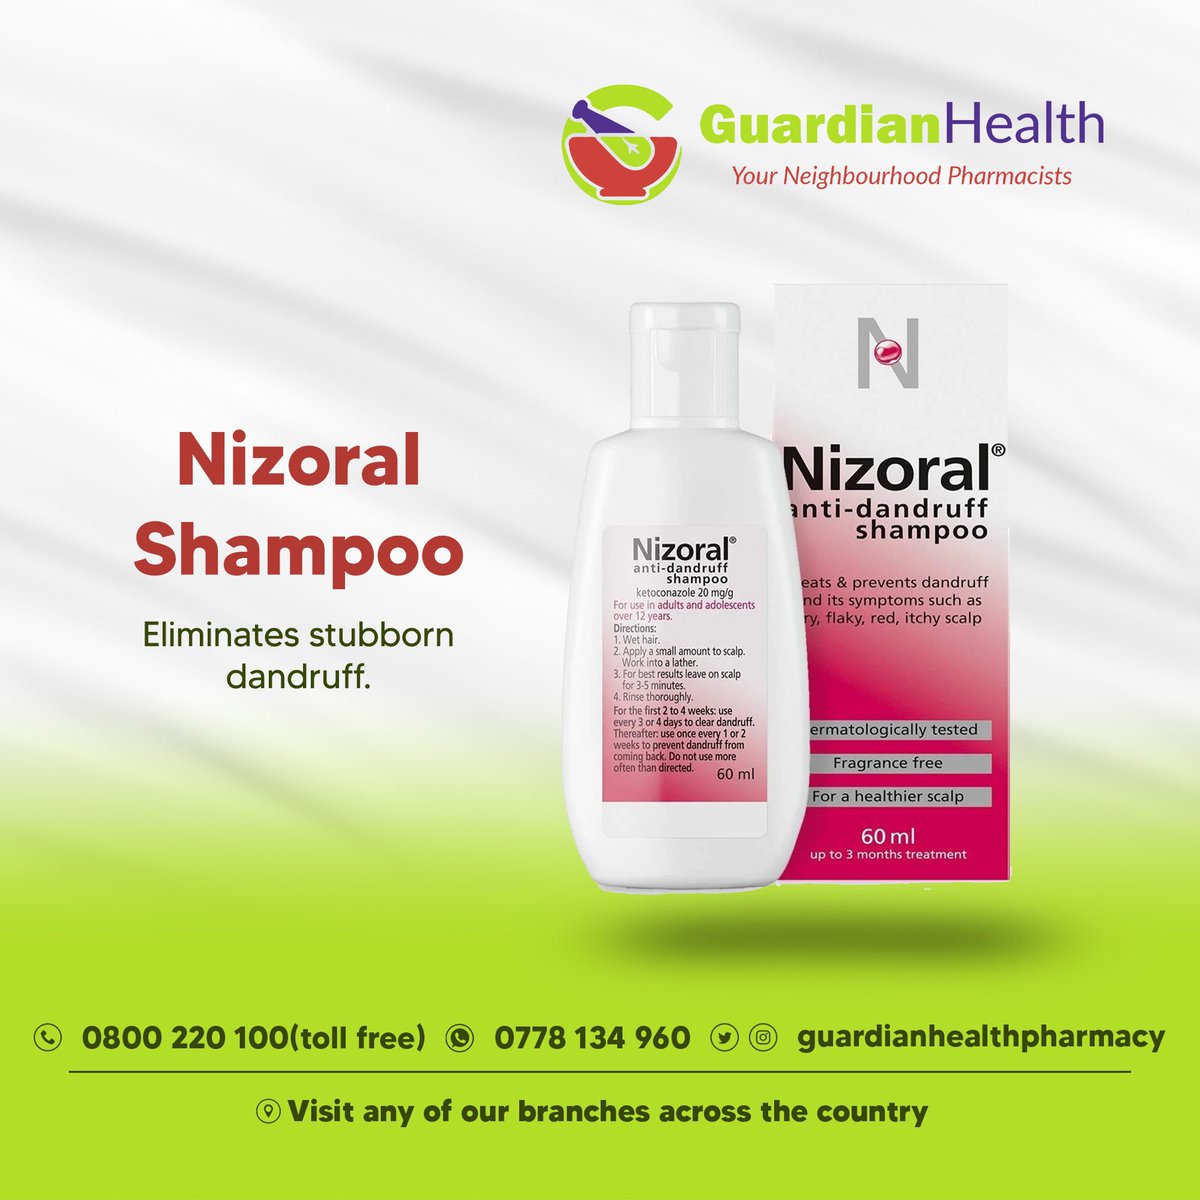 Nizoral anti-dandruff shampoo treats & prevents dandruff & its symptoms such as a dry, flaky, red, itchy scalp.

☎️Order now through our tollfree 0800220100 or WhatsApp 0778134960

#YourNeighbourhoodPharmacists 
#Dandruff #ItchyScalp